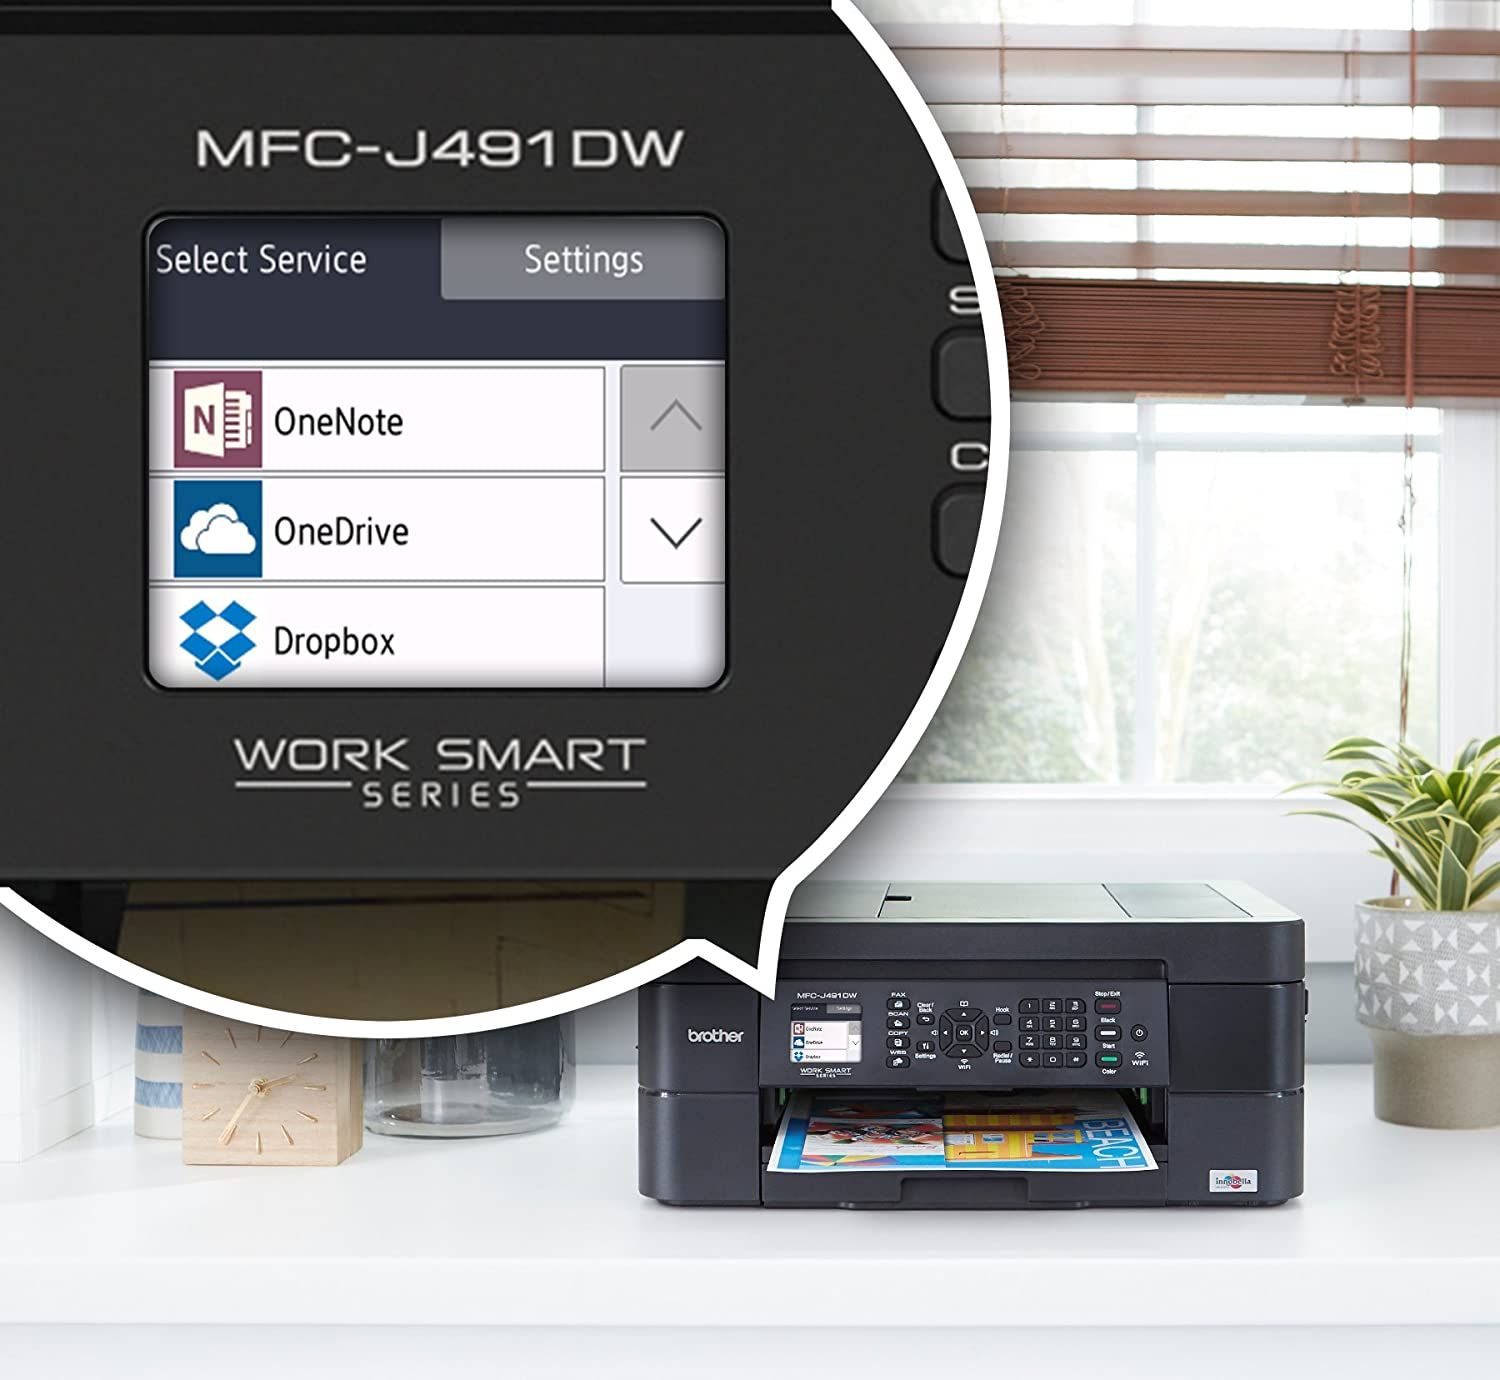 Brother MFC-J491DW printer cloud storage feature